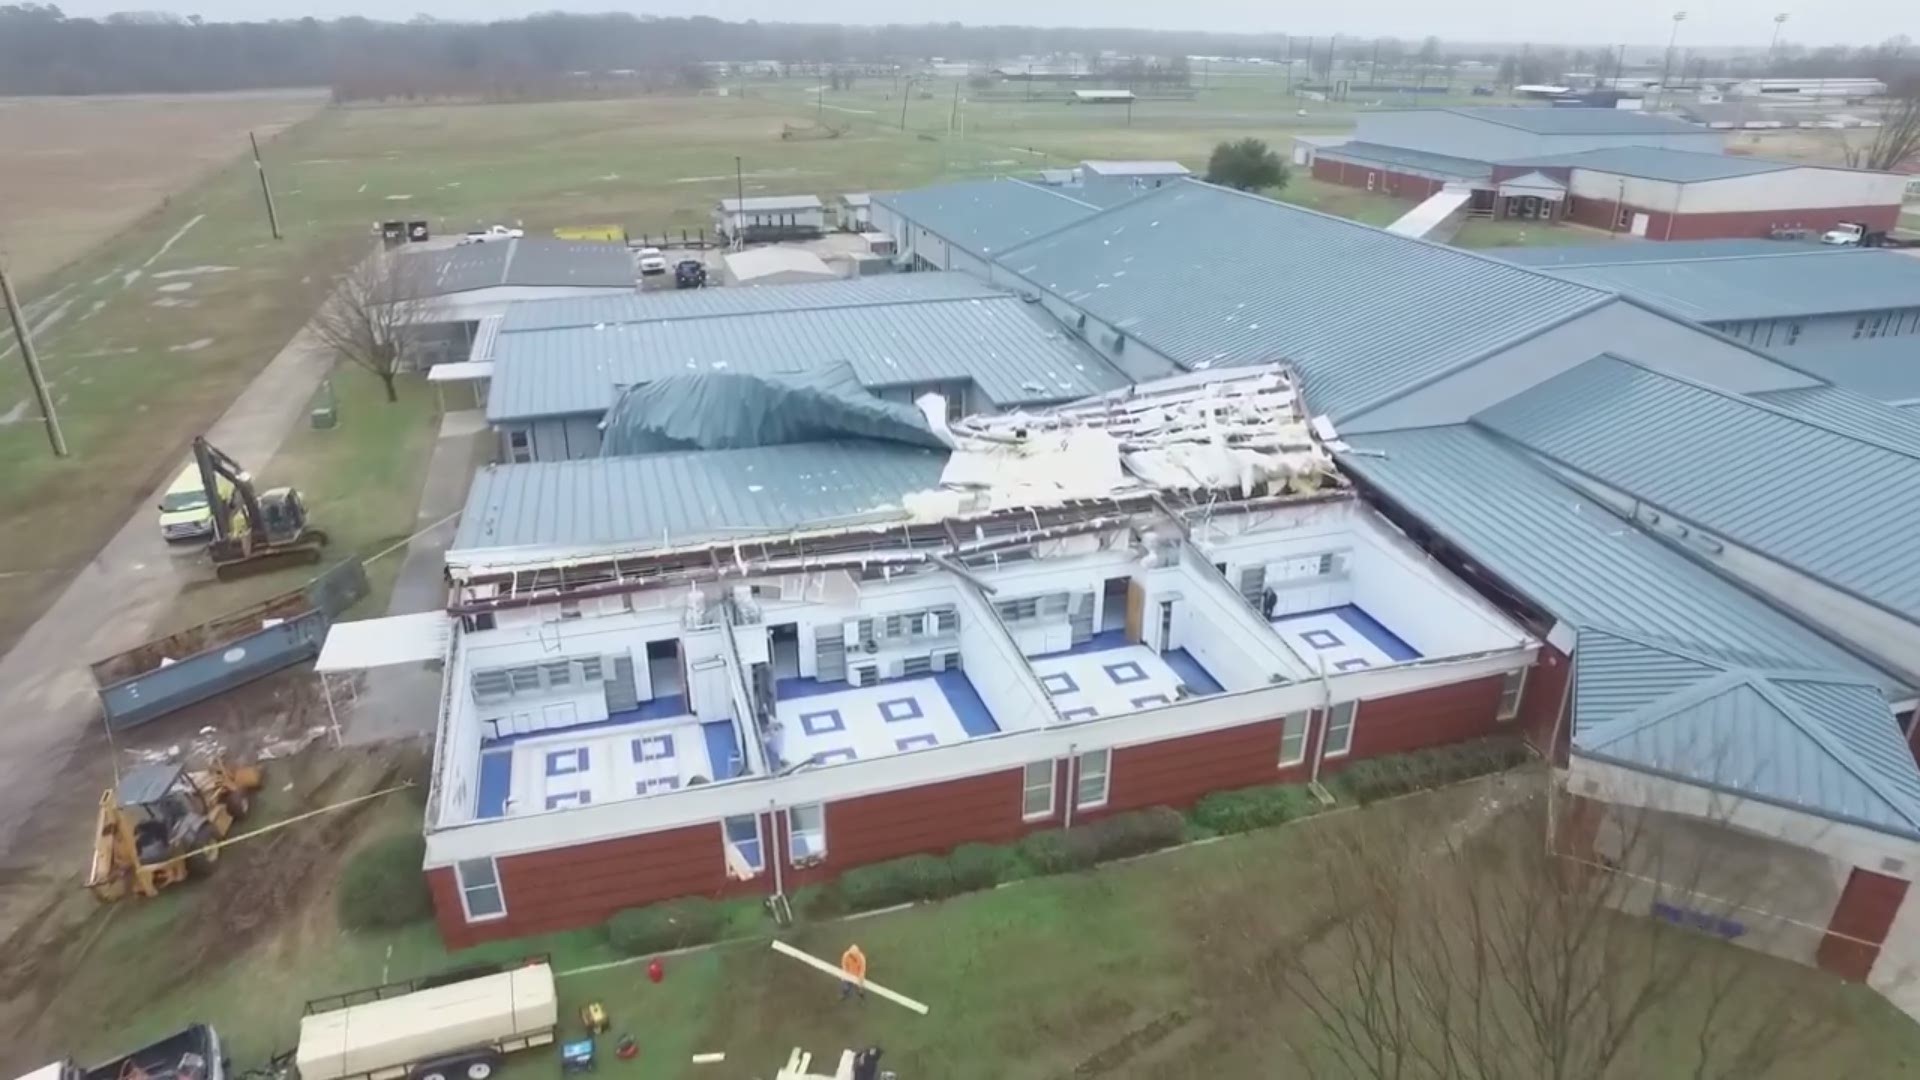 Benton Middle School in Bossier Parish was damaged by the storm. Drone footage shows how its roof was peeled back by wind.